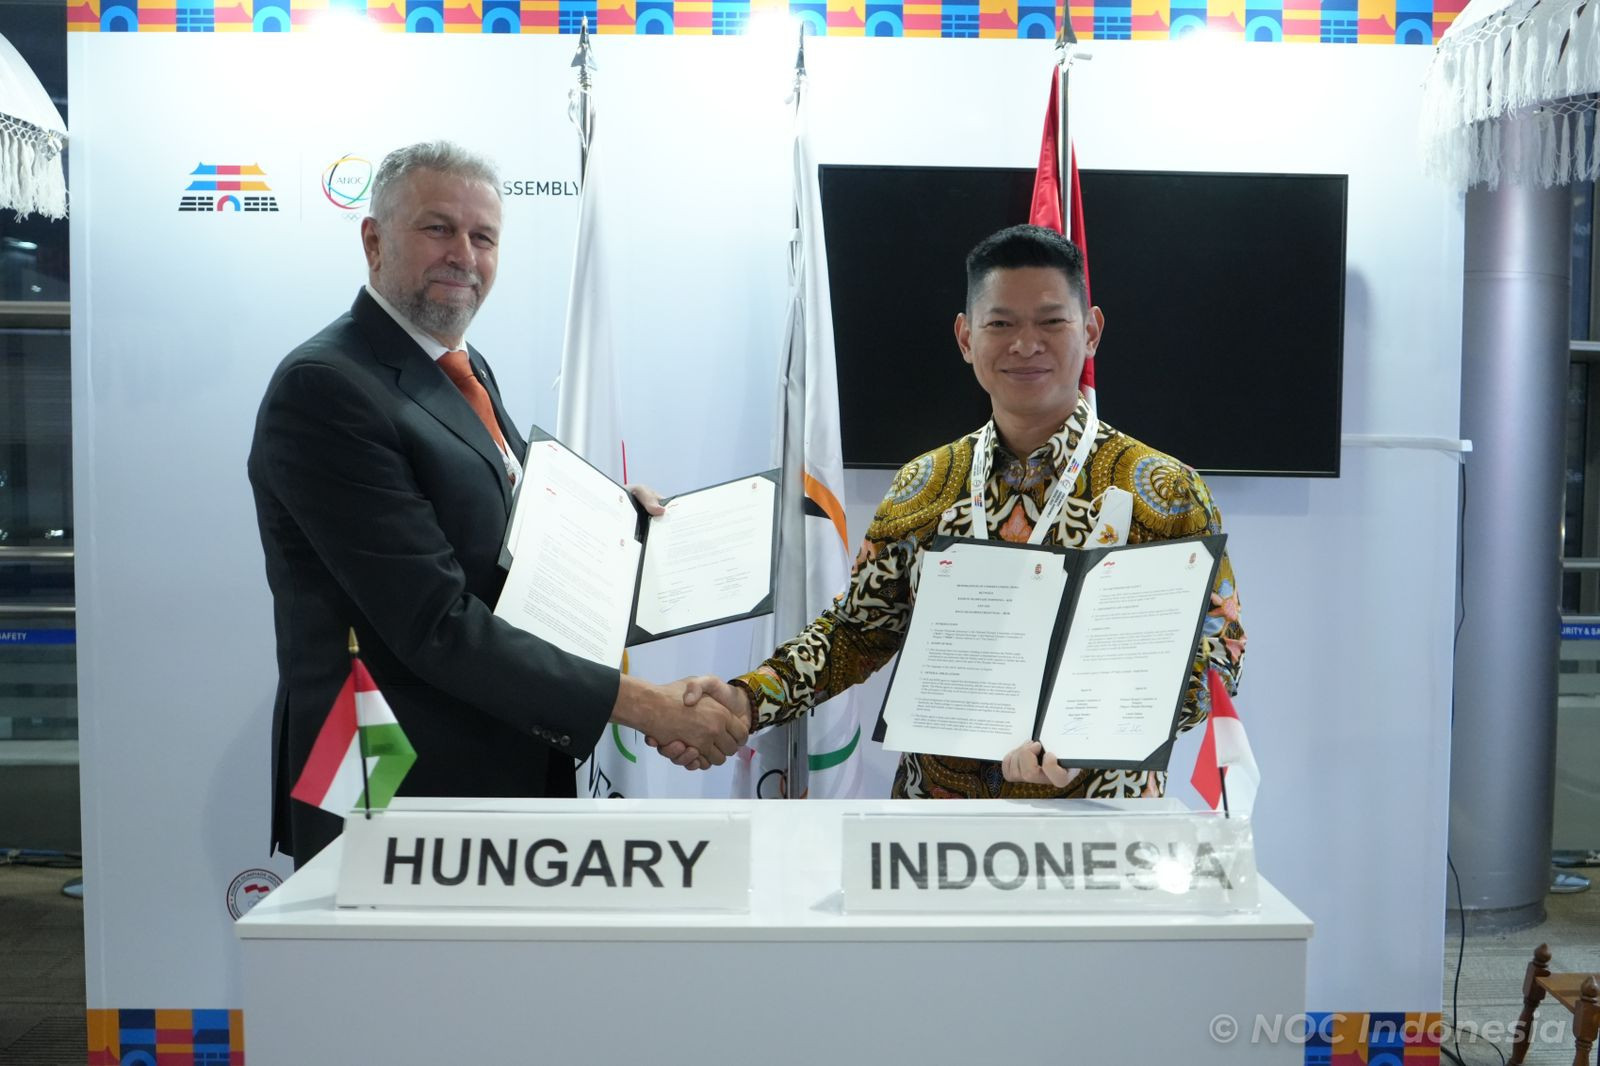 NOCs of Indonesia and Hungary sign cooperation deal